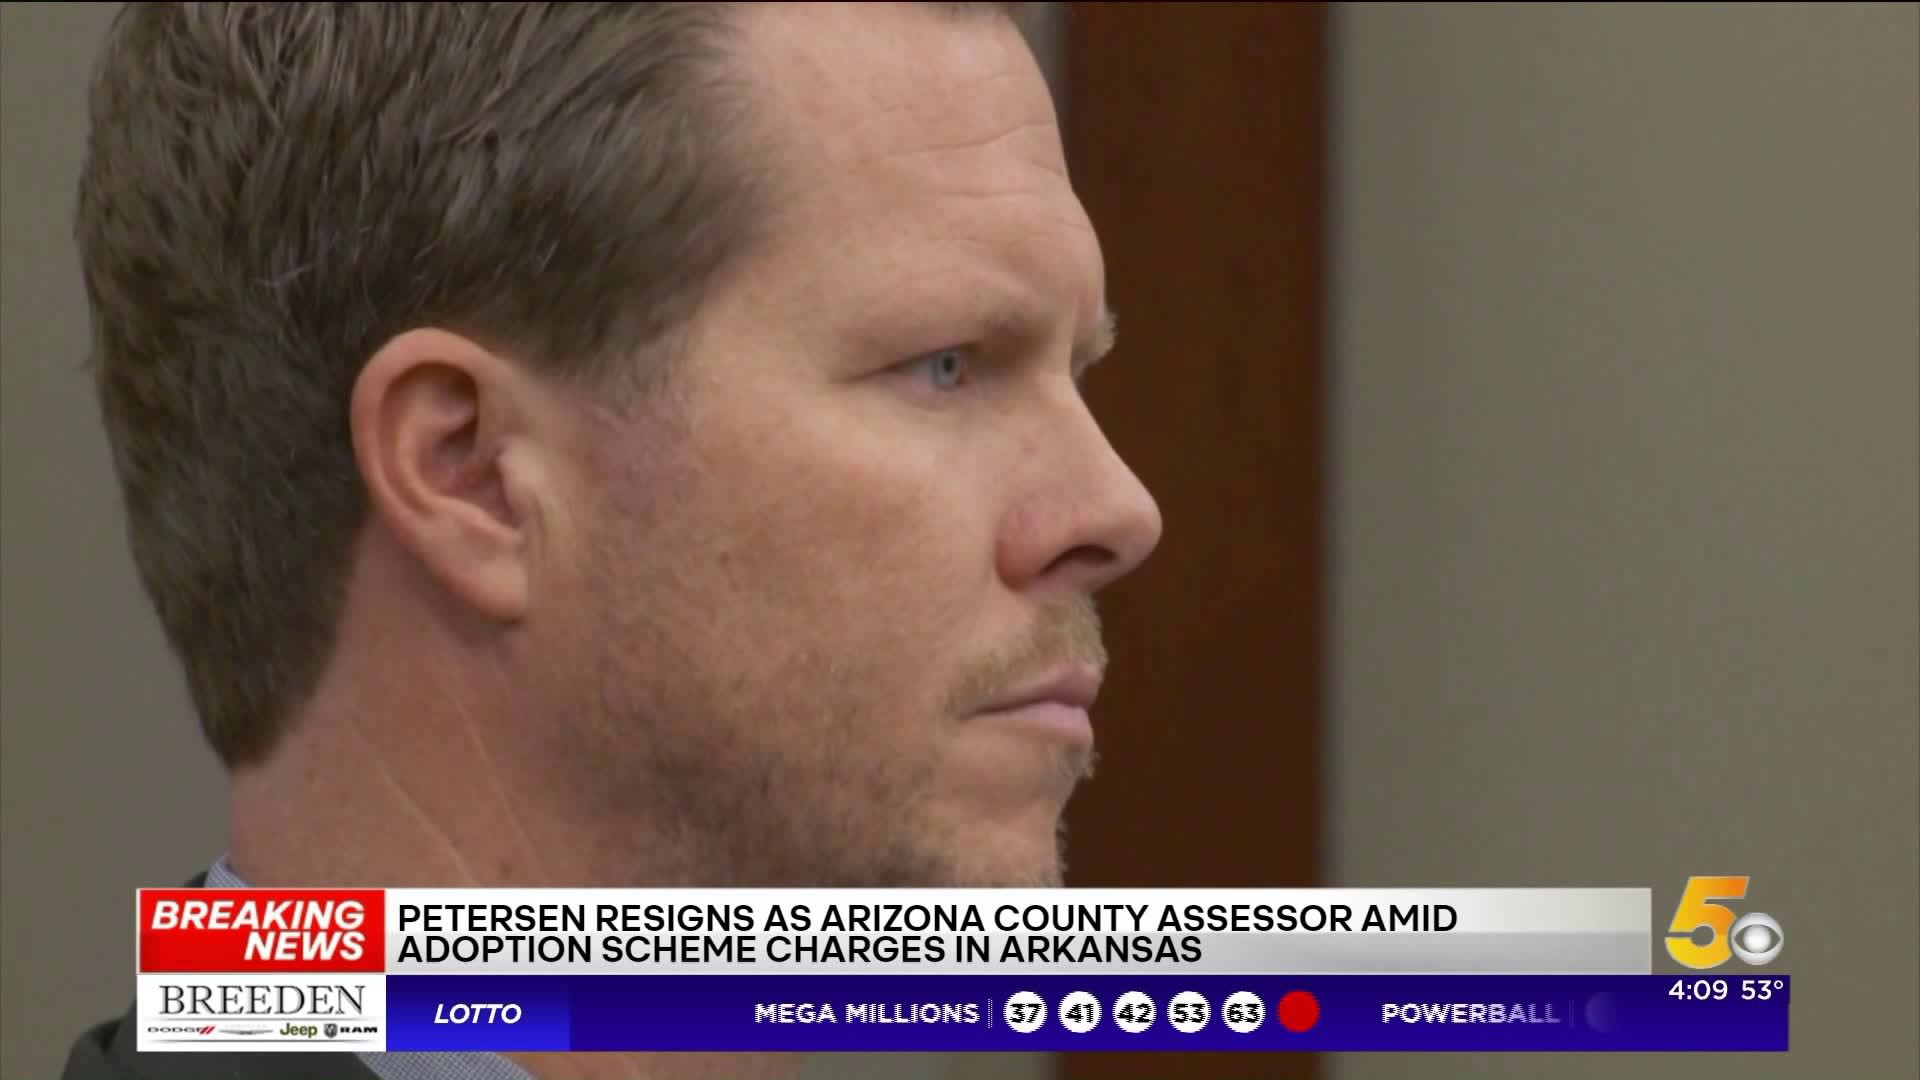 Arizona Official Paul Petersen Quits Job Amid Adoption Scheme Charges In Arkansas